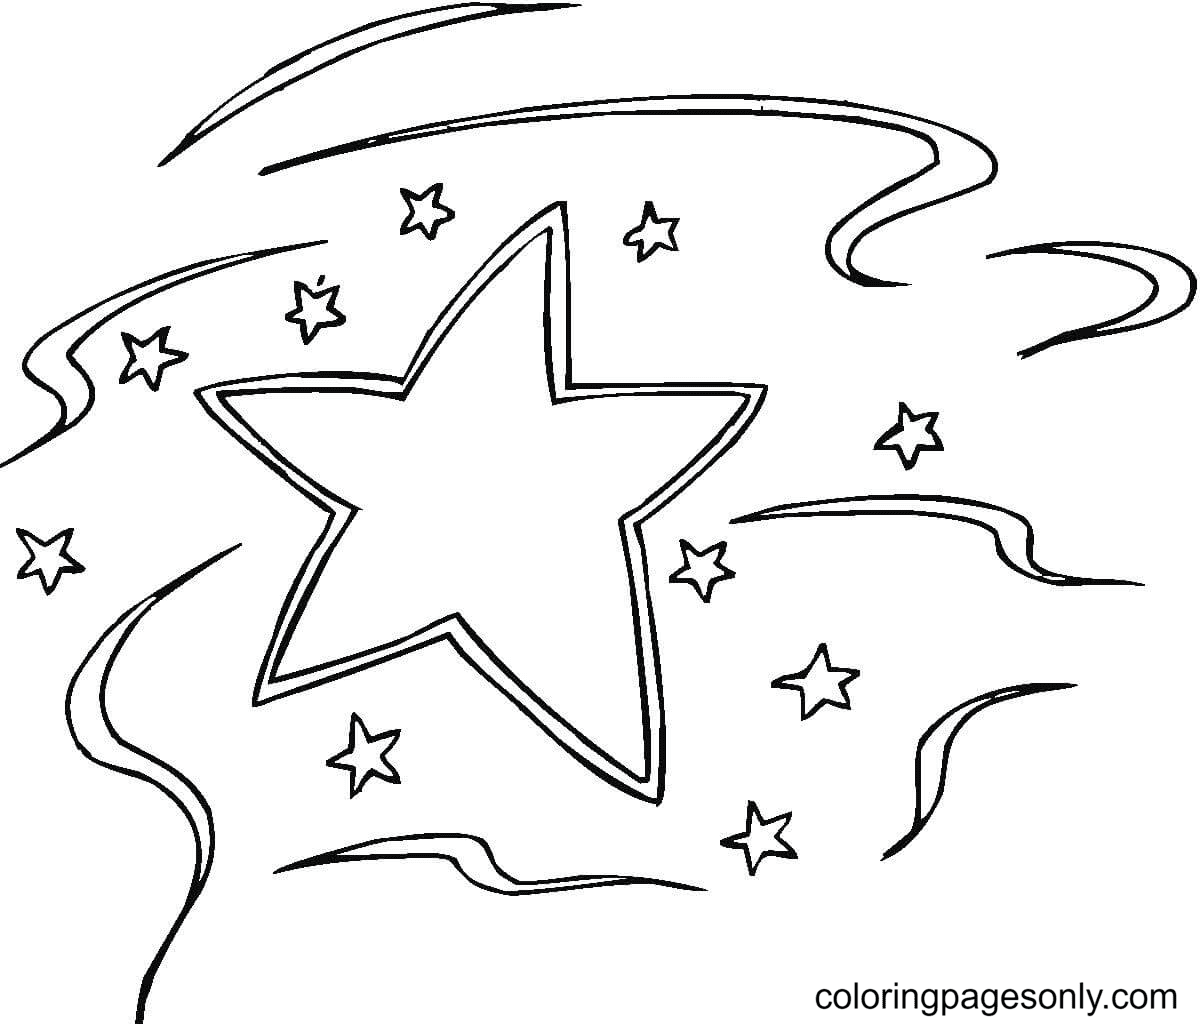 Decoration Star Coloring Page